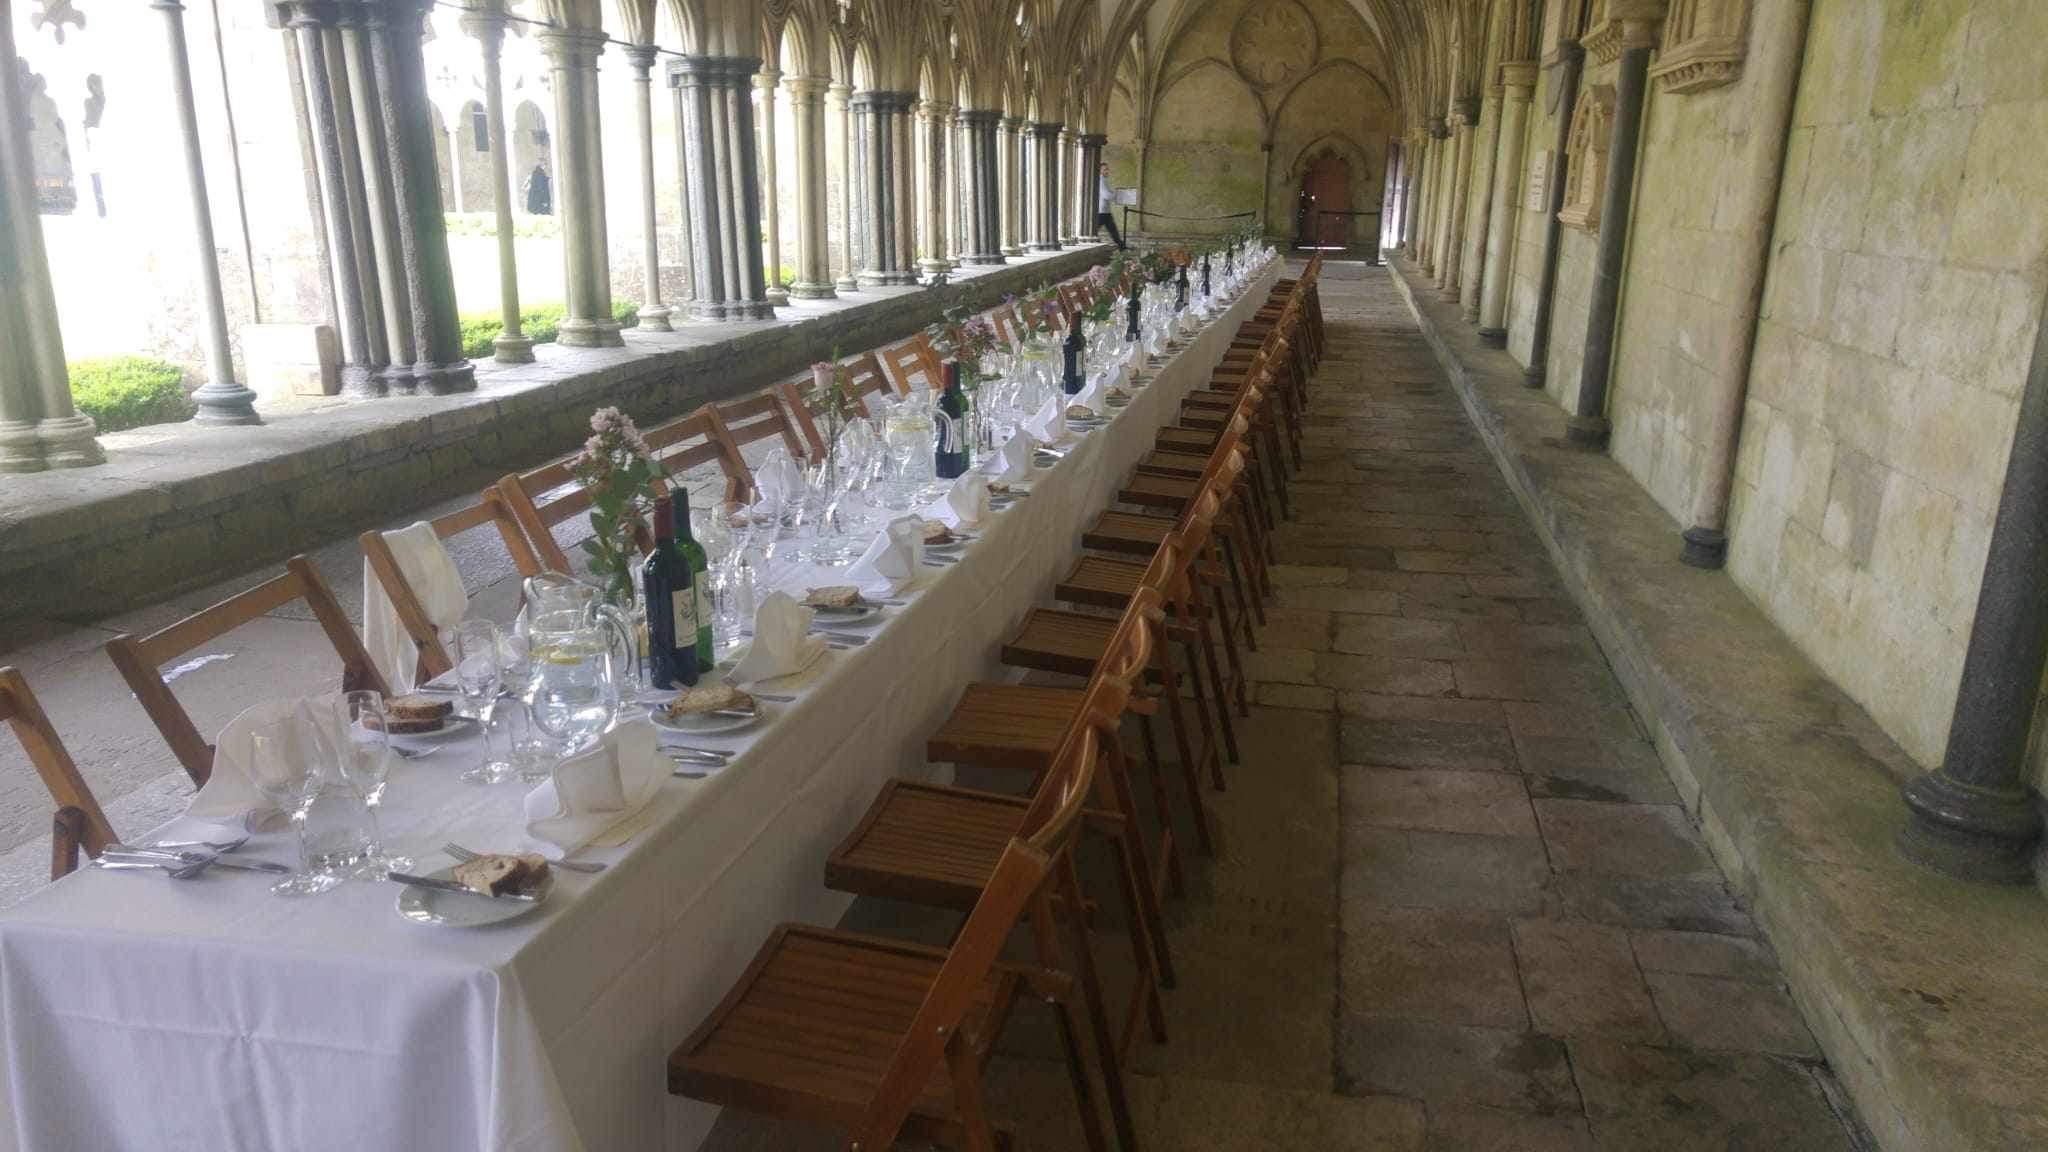 Long table set with table cloth and glasses along a cloister arm